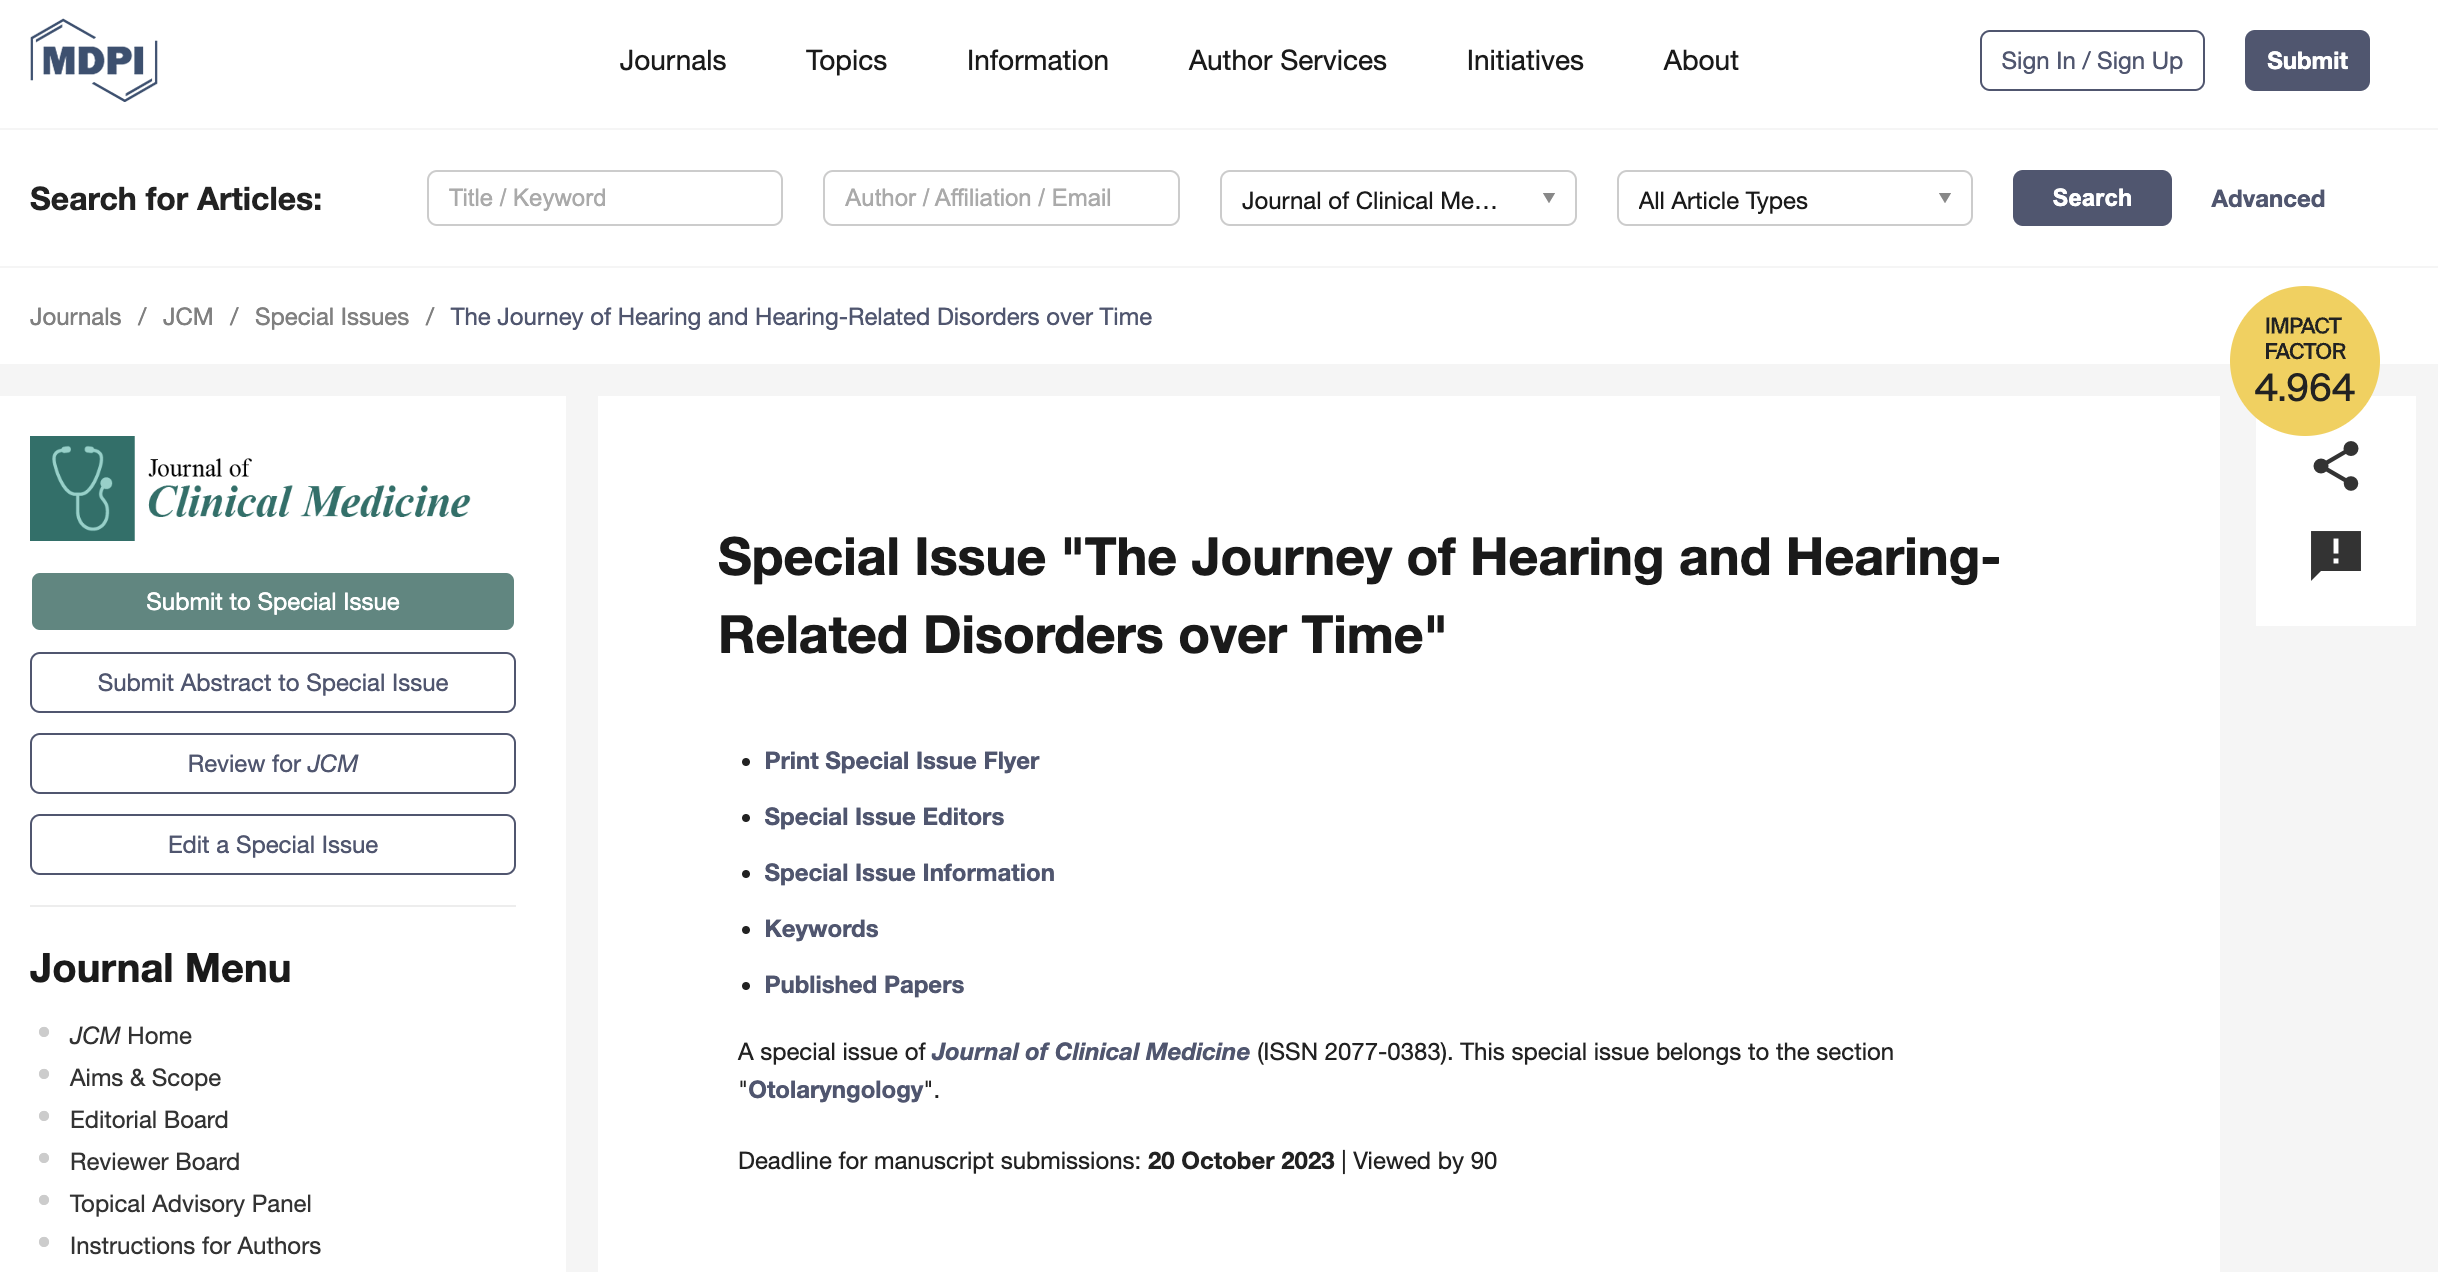 The Journey of Hearing and Hearing Related Disorders over Time